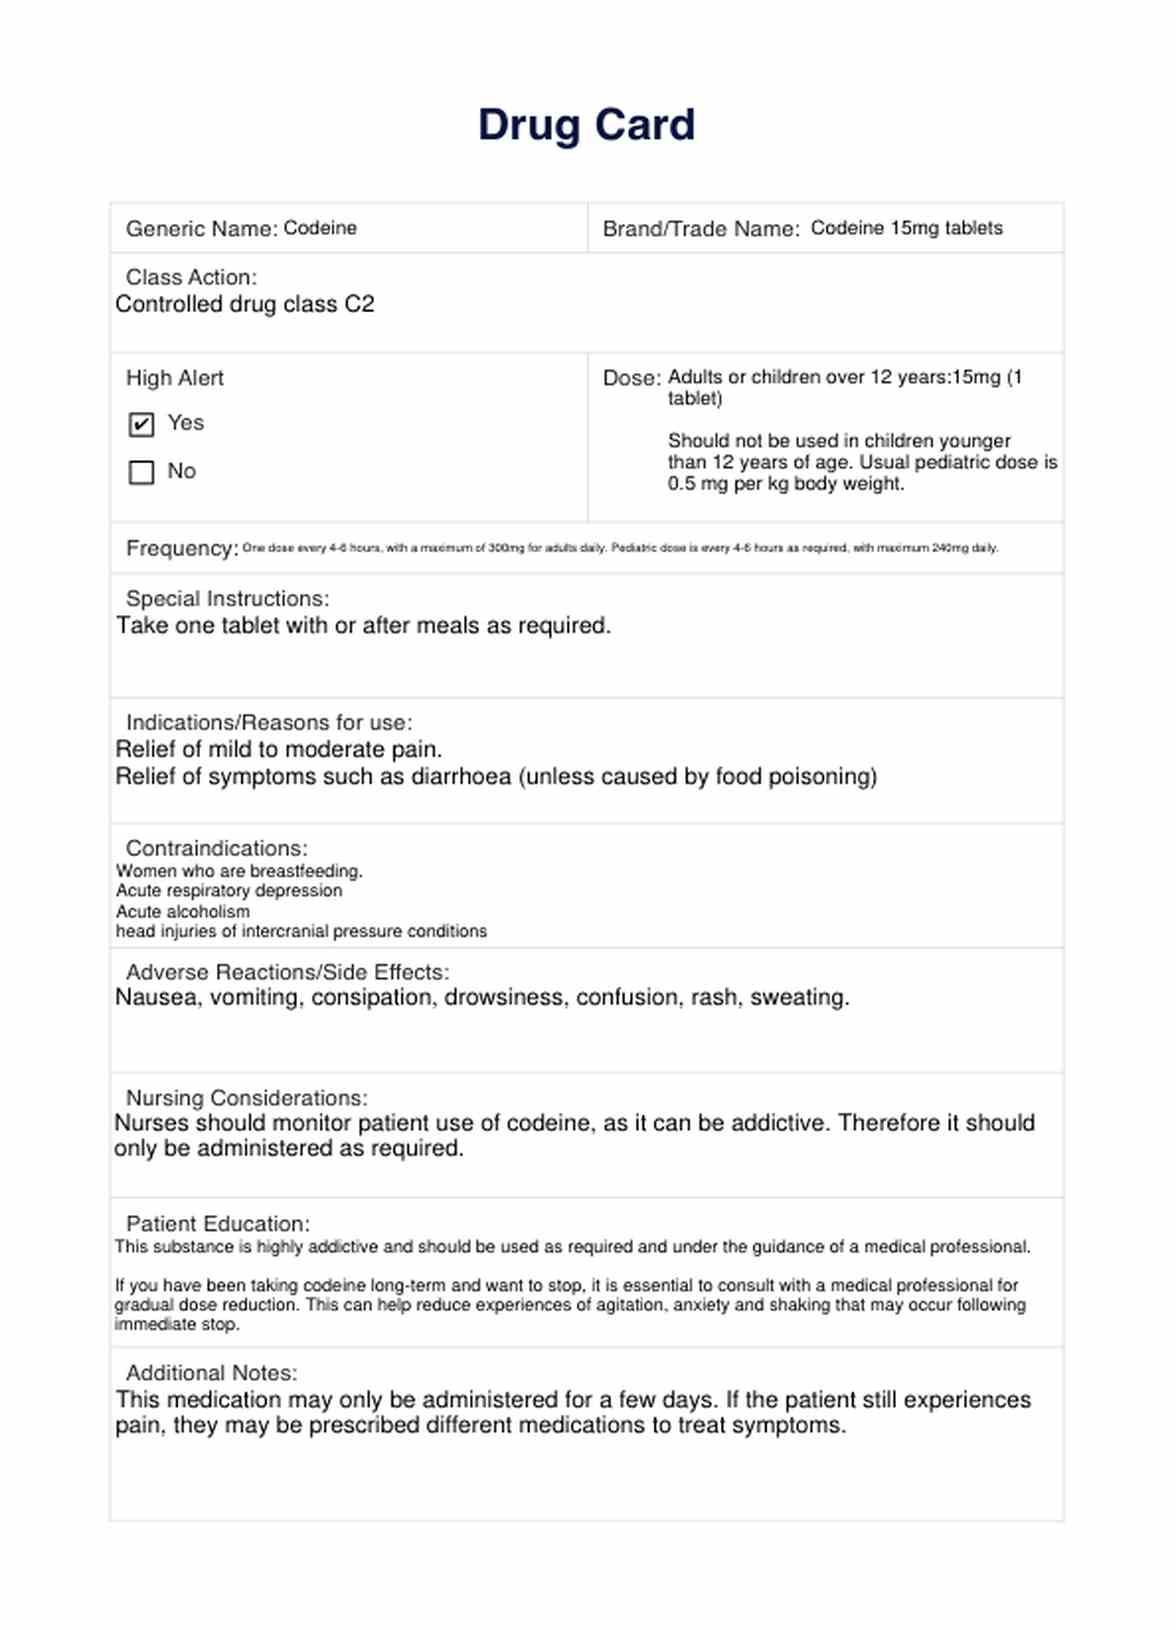 Drug Card Template PDF Example